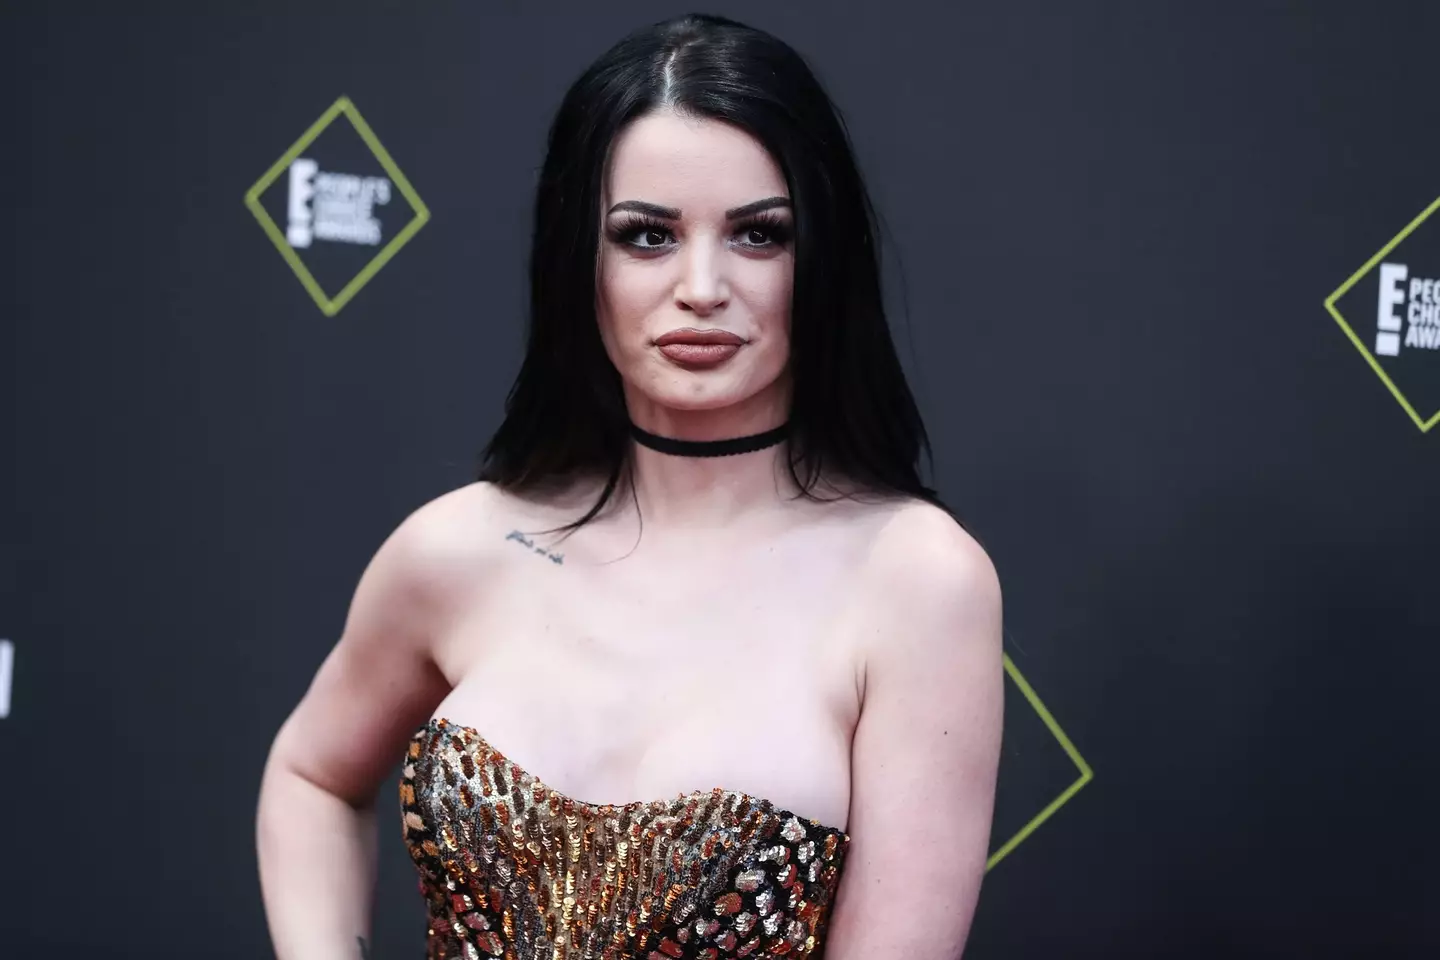 Saraya admitted she hid in a bush after the naked images of her leaked.